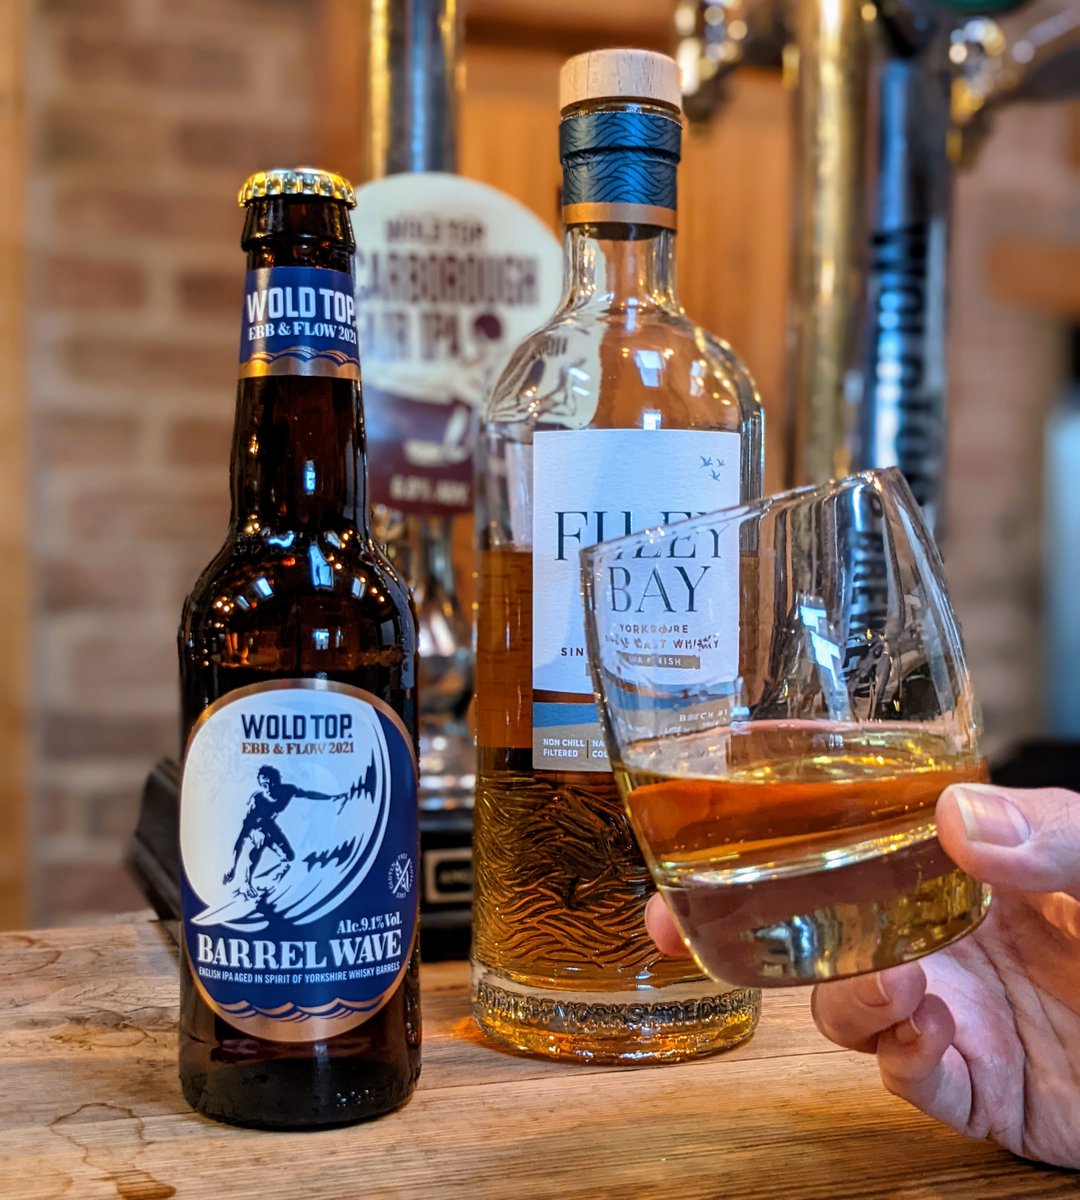 We’ll be toasting our haggis with some Filey Bay IPA Finish whisky from @spirityorkshire tonight. They used the barrels we'd aged some Scarborough Fair IPA in to finish off some Filey Bay whisky and create IPA Finish - what a combination! Happy Burns Night!